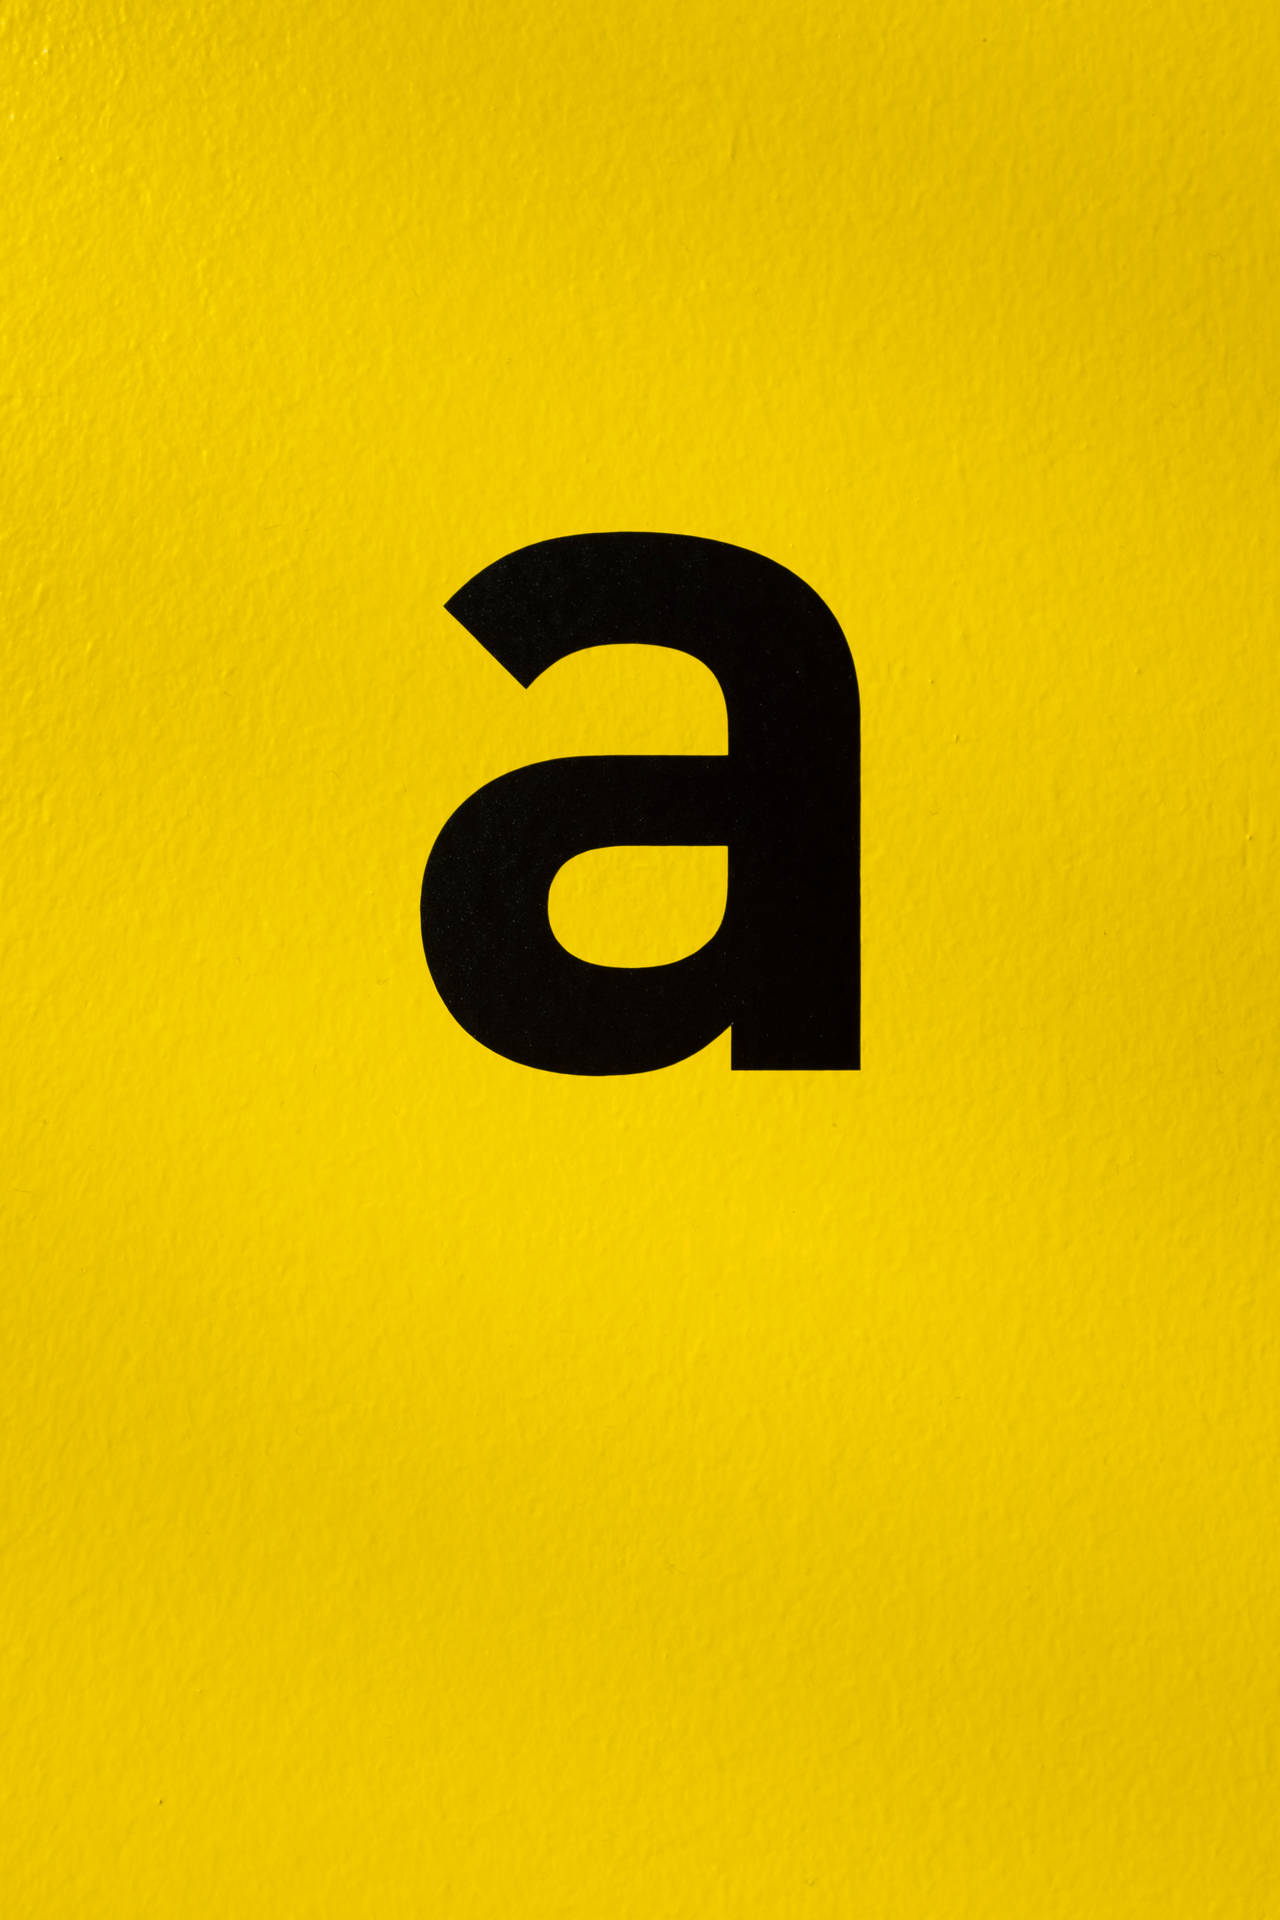 Small Letter A Font On Yellow wallpaper